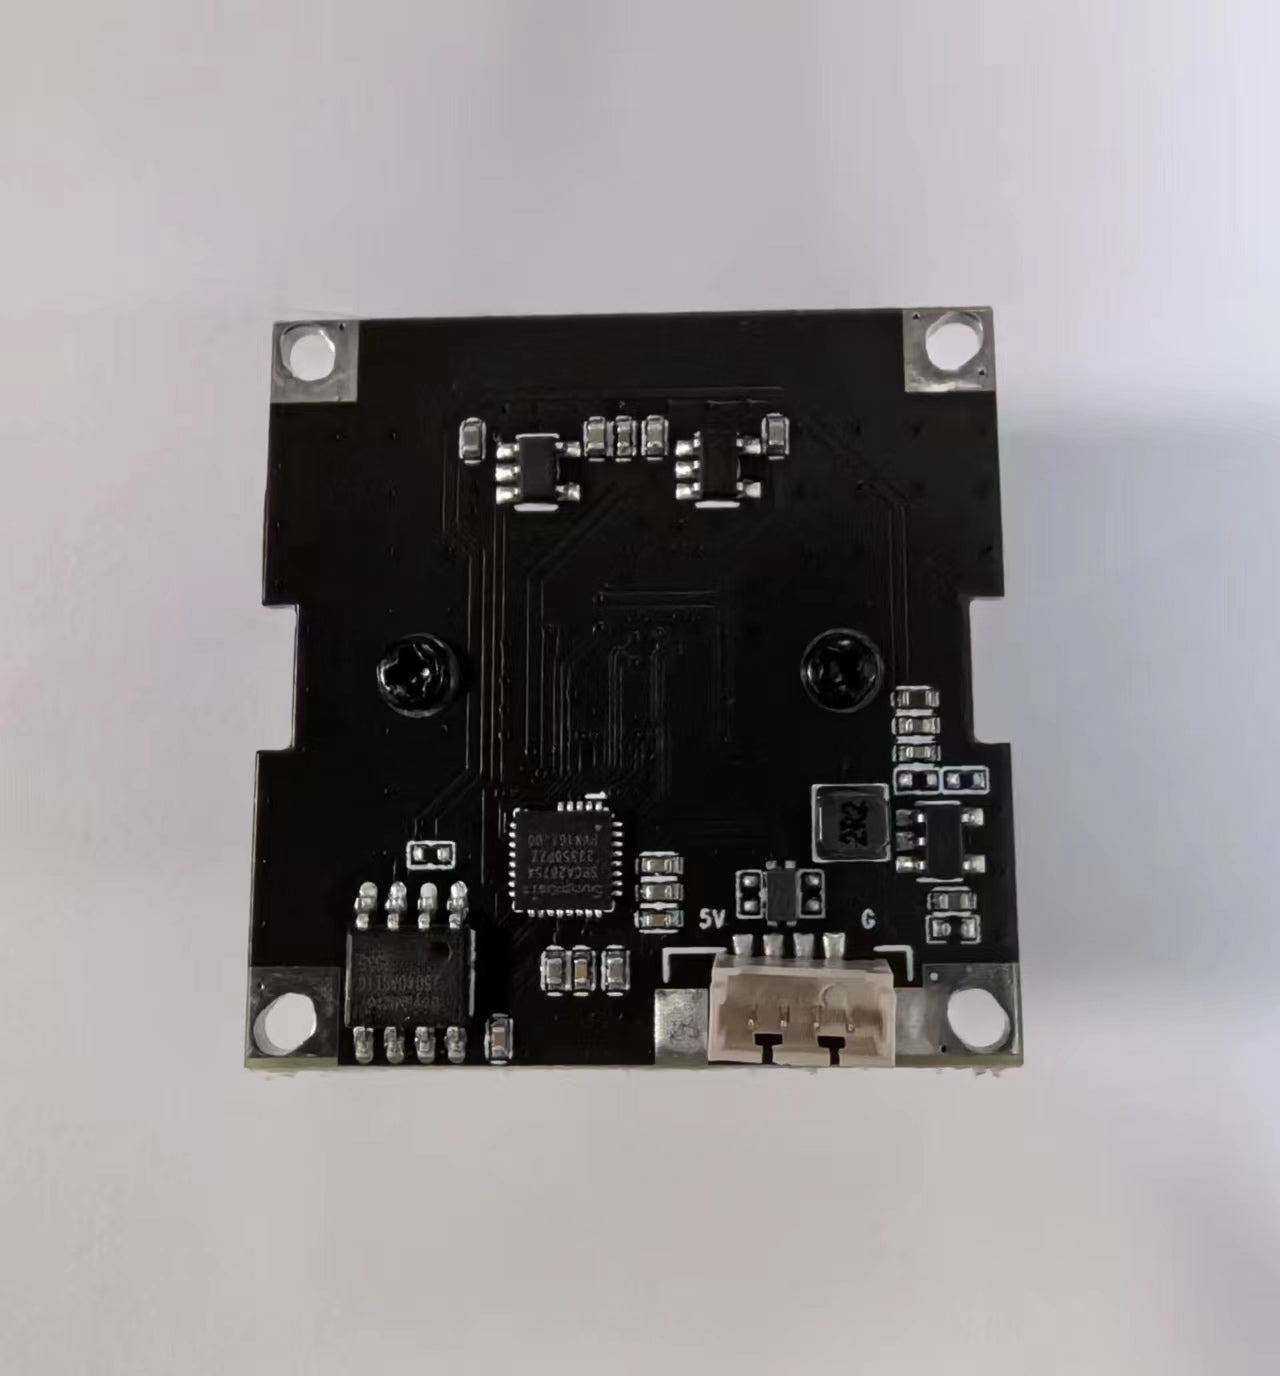 10pcs Low cost USB2.0 camera module,small size,USB connector with cable and UVC compatible - SICUBE